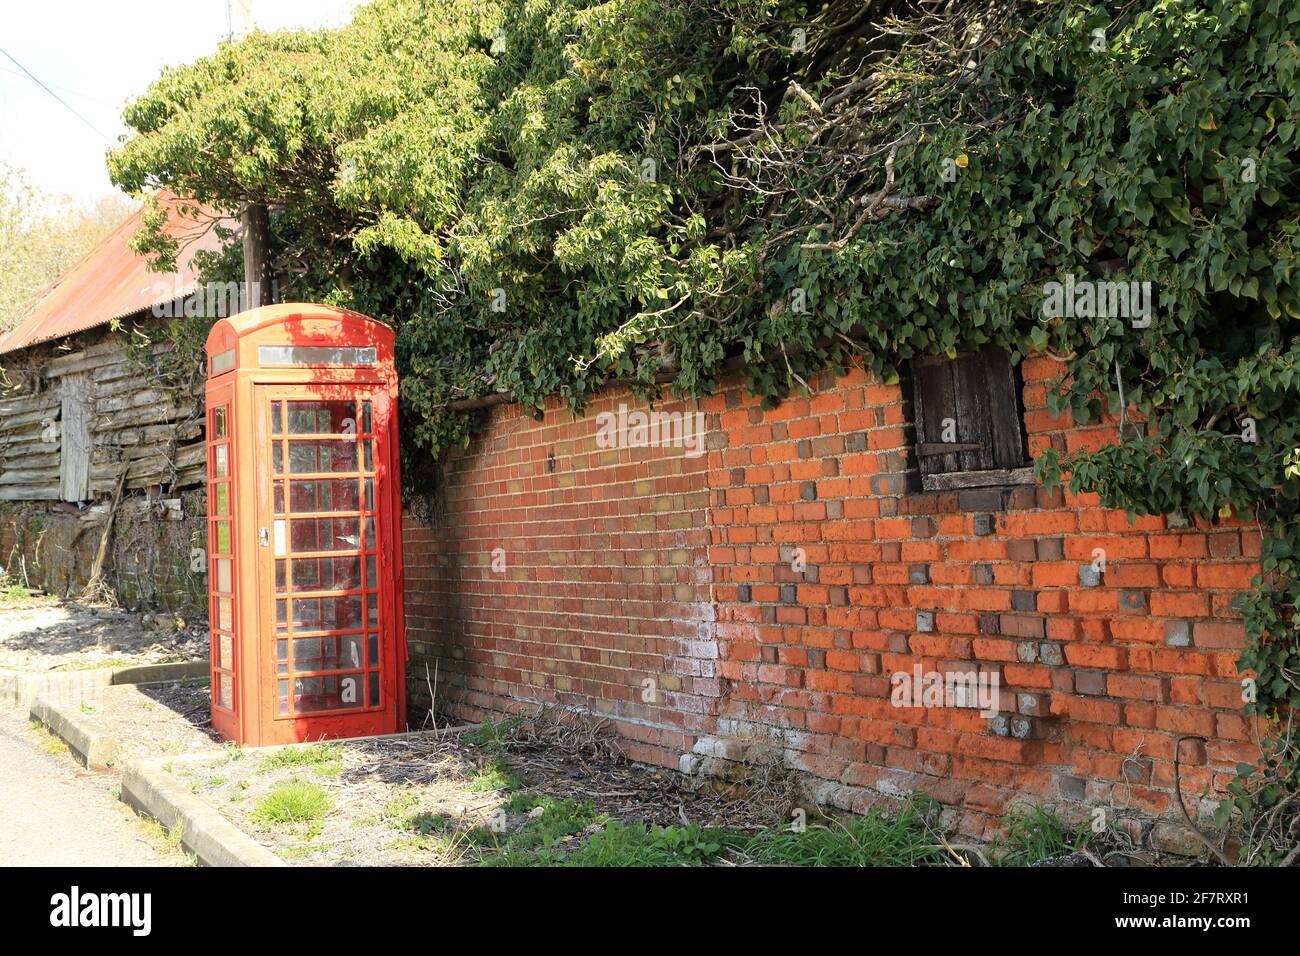 Old red telephone box and red letterbox in village of Stowting on the edge of the North Downs, Stowting Hill, Stowting, Kent, United Kingdom Stock Photo